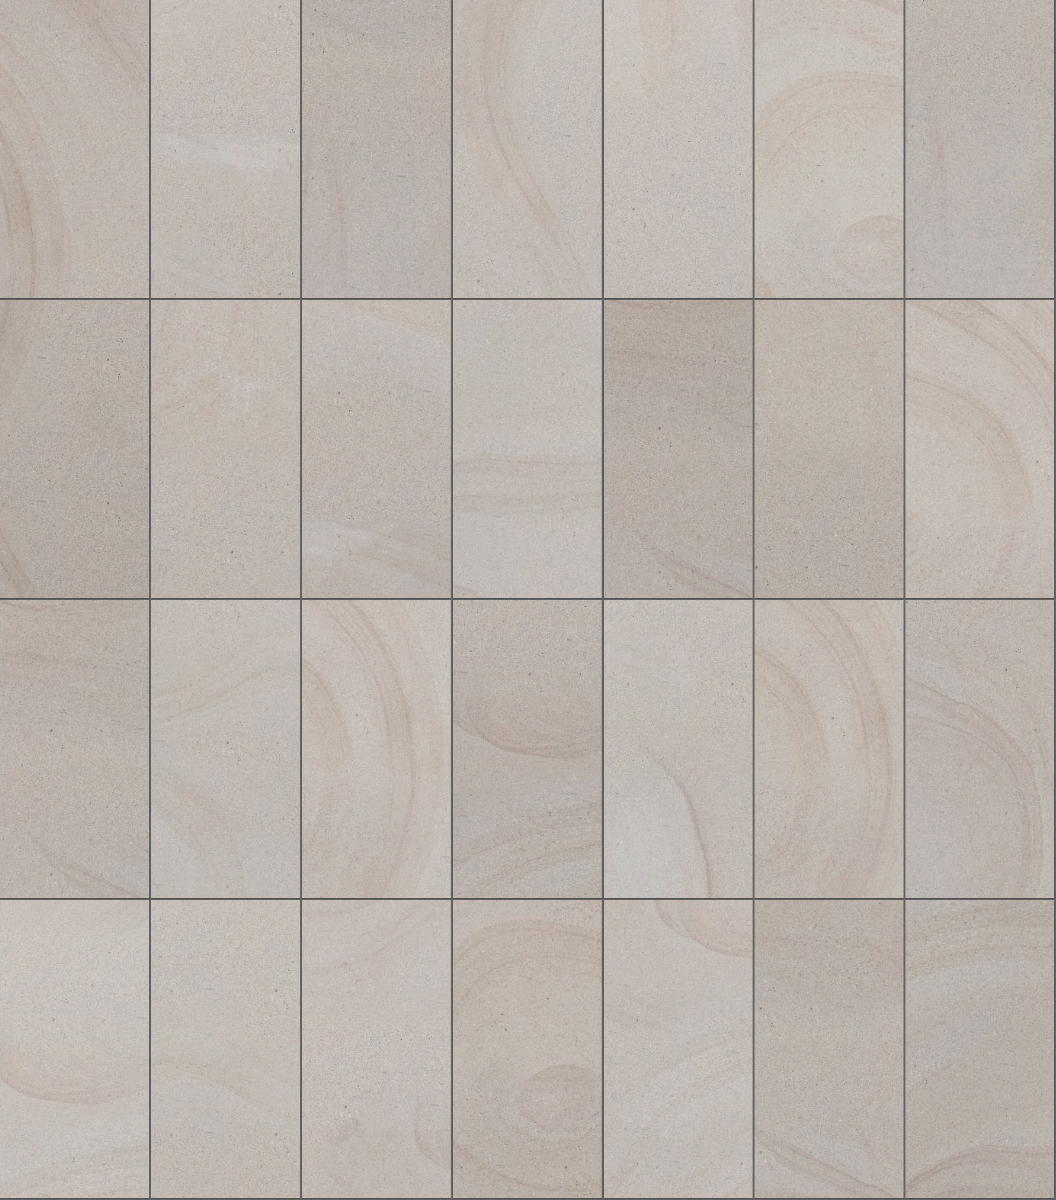 A seamless stone texture with blonde sandstone blocks arranged in a Stack pattern